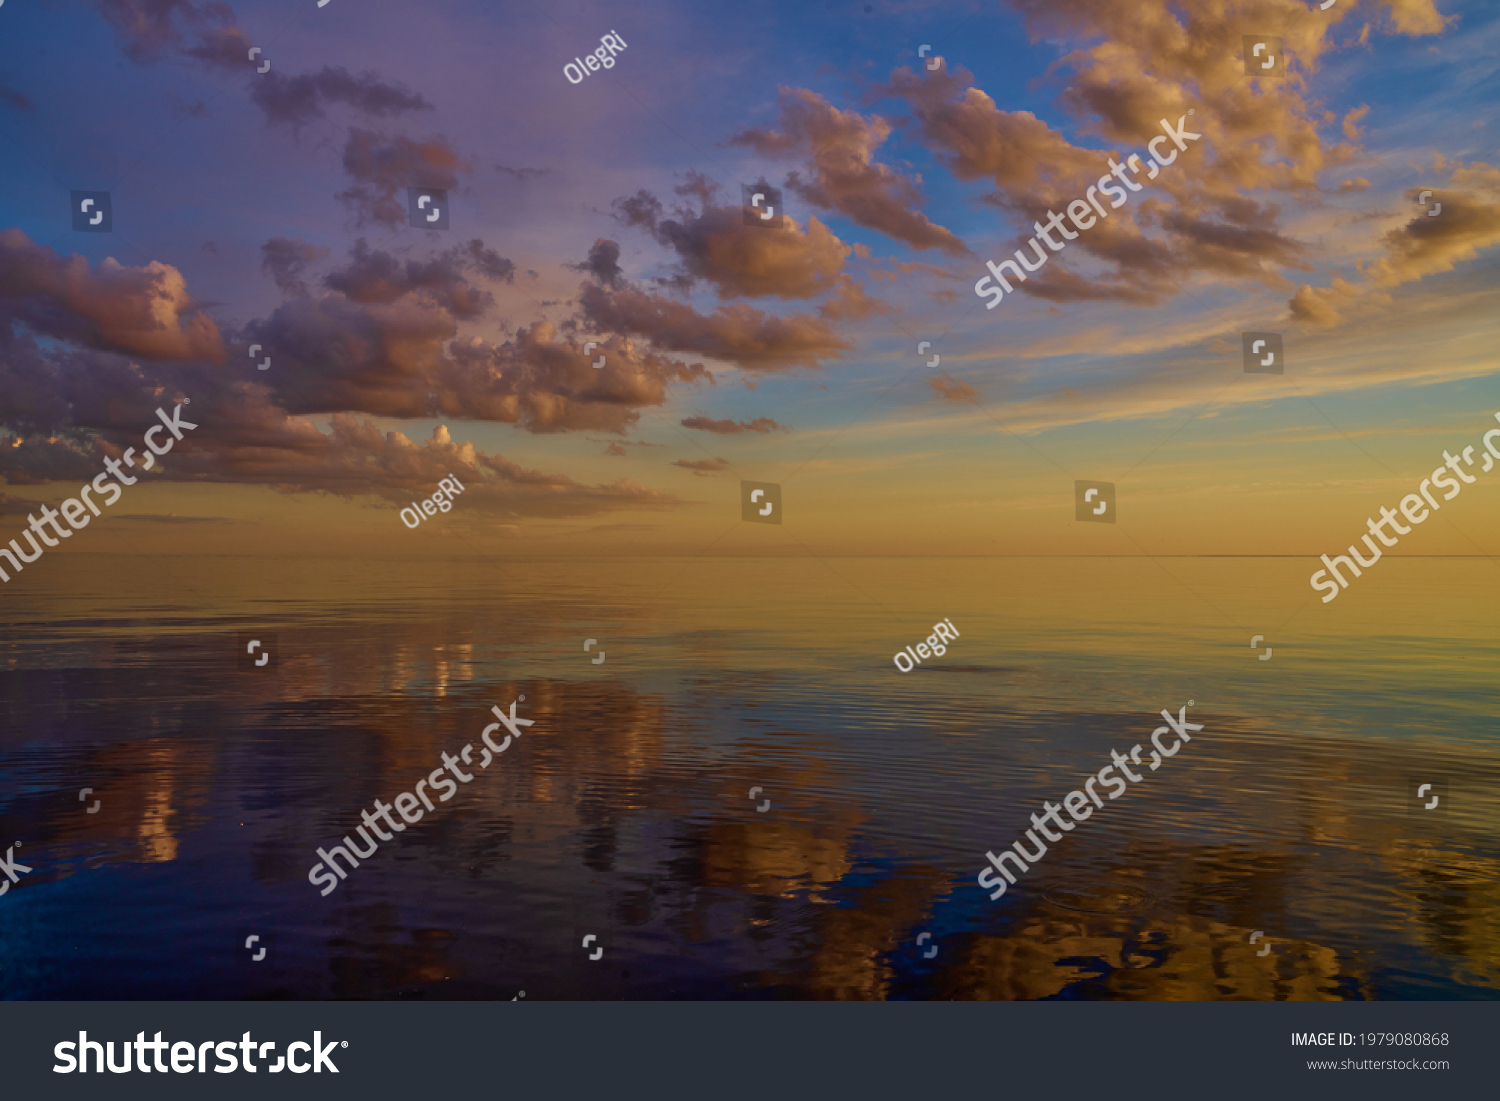 Beautiful sunset over sea with reflection in water, majestic clouds in the sky. #1979080868